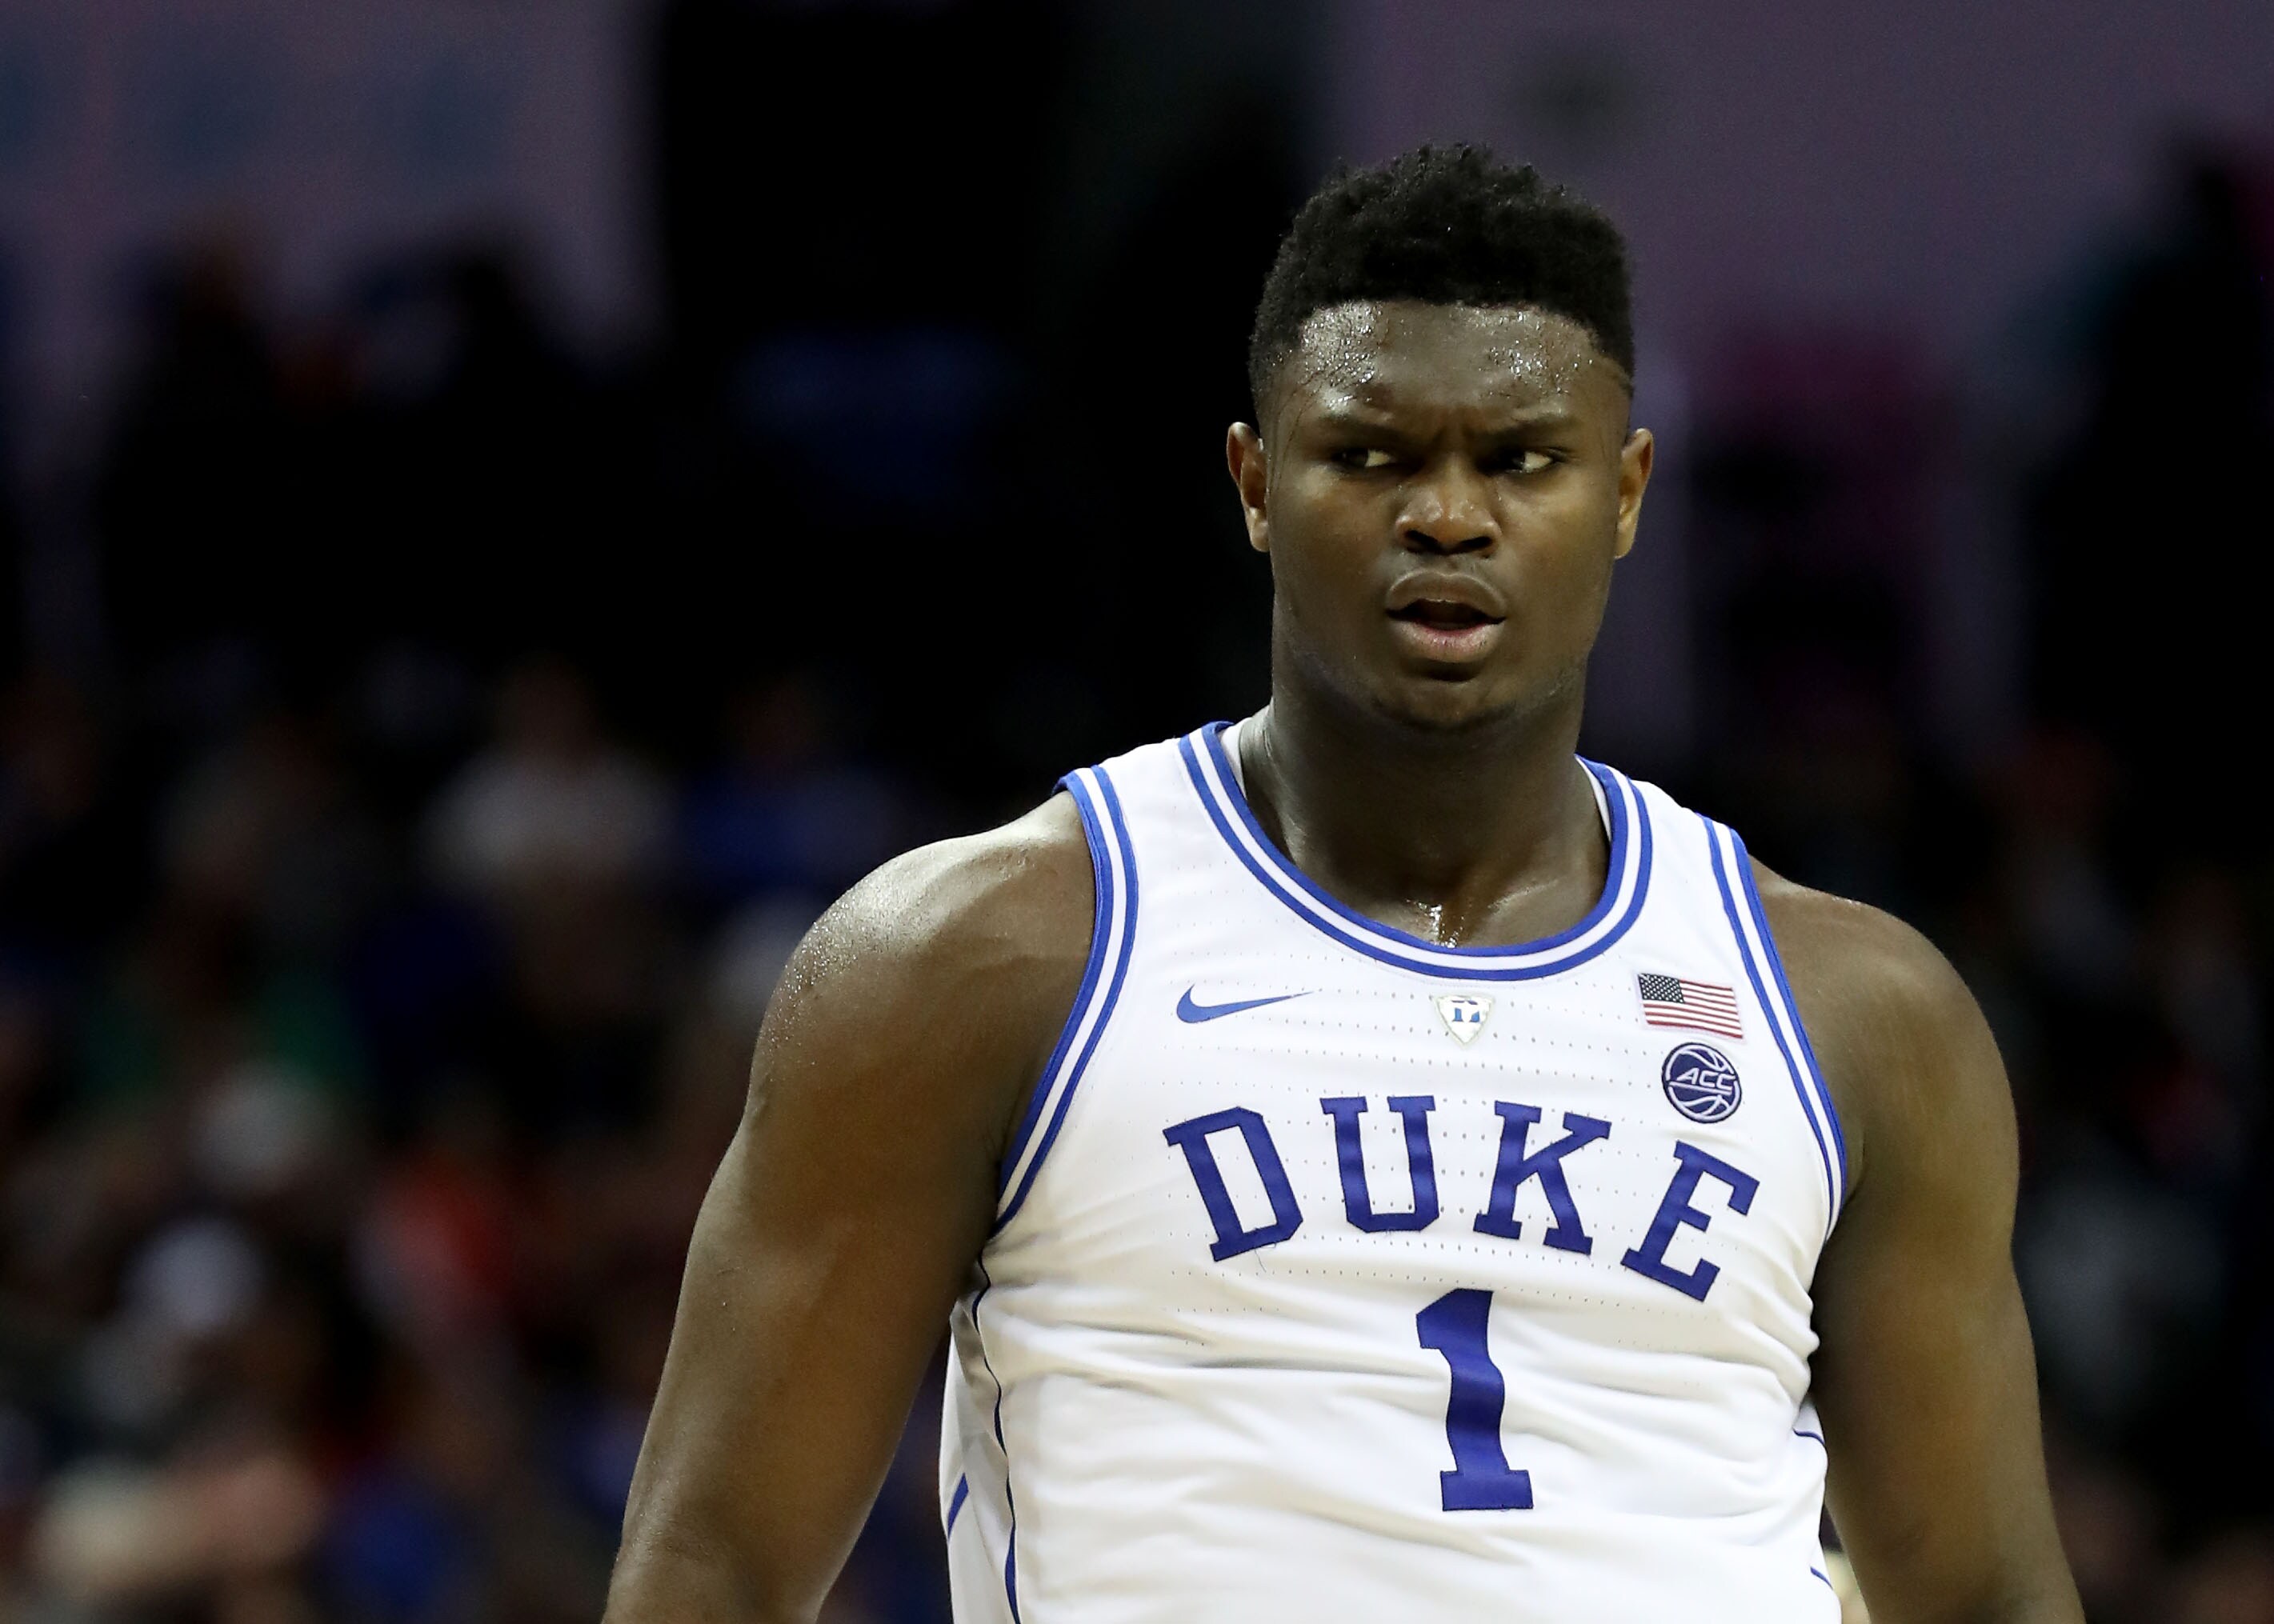 Want To Win Your March Madness Pool Don't Pick Duke - Zion Williamson , HD Wallpaper & Backgrounds